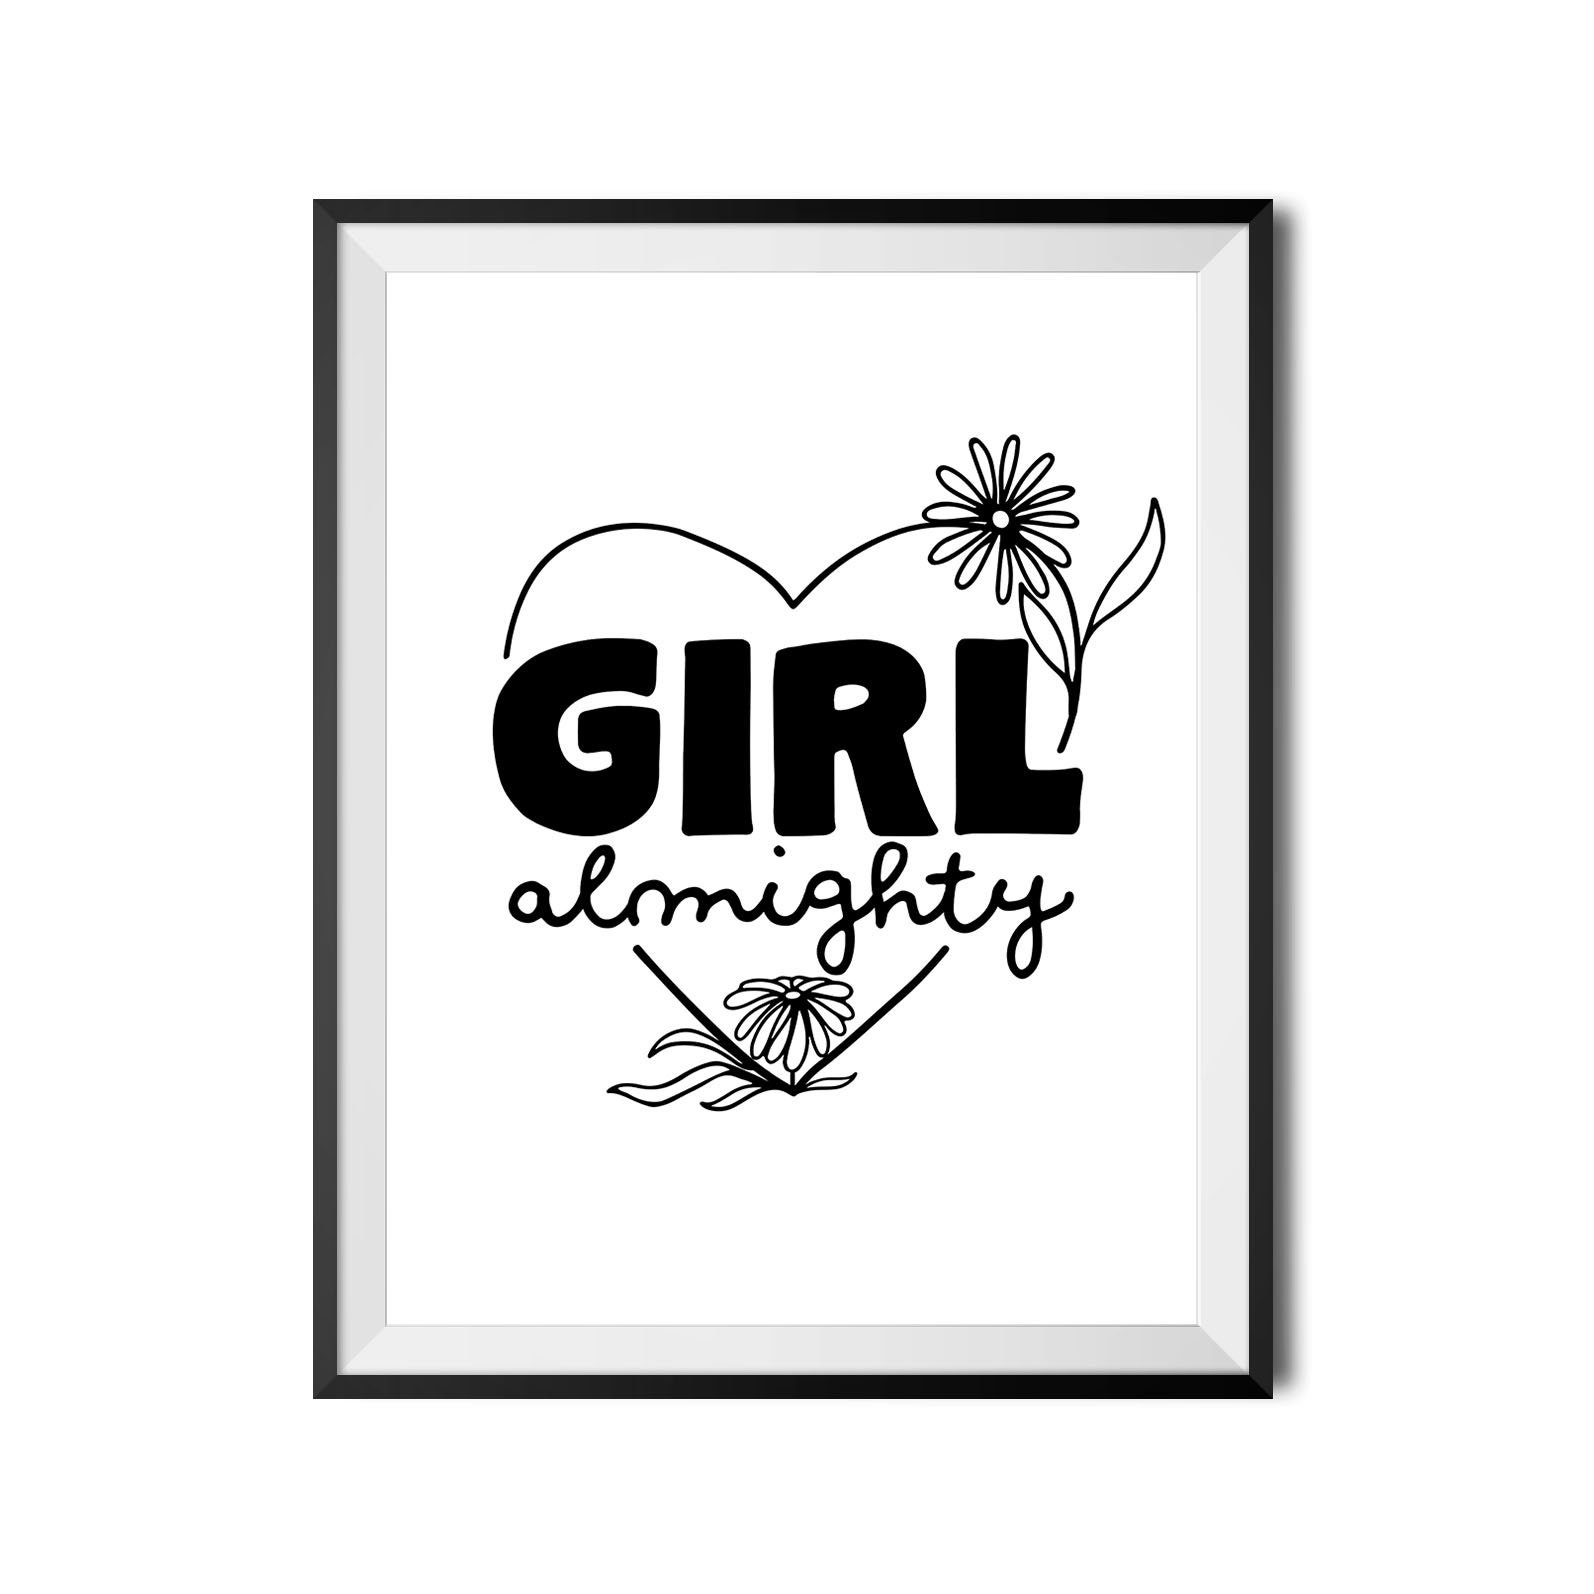 Girl Almighty, Printable, Quote, Girl Power, Girls Room Decor, Nursery Art,  Typography Print, Digital Print, Black & White, INSTANT DOWNLOAD 